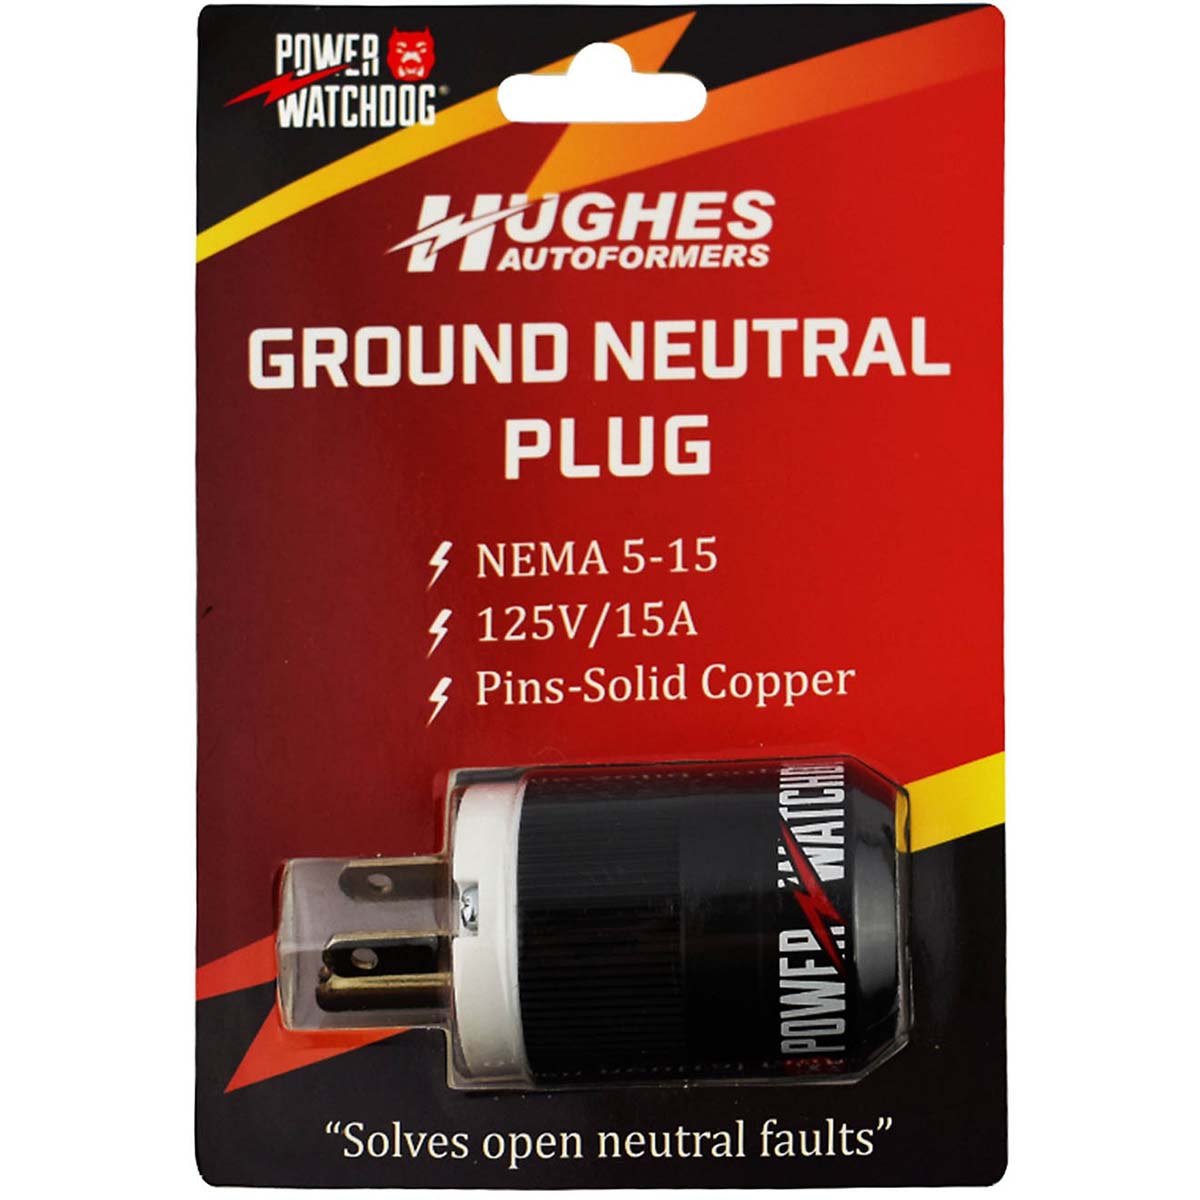 Hughes Ground Neutral Bonding Plug For Generators With Floating Neutrals